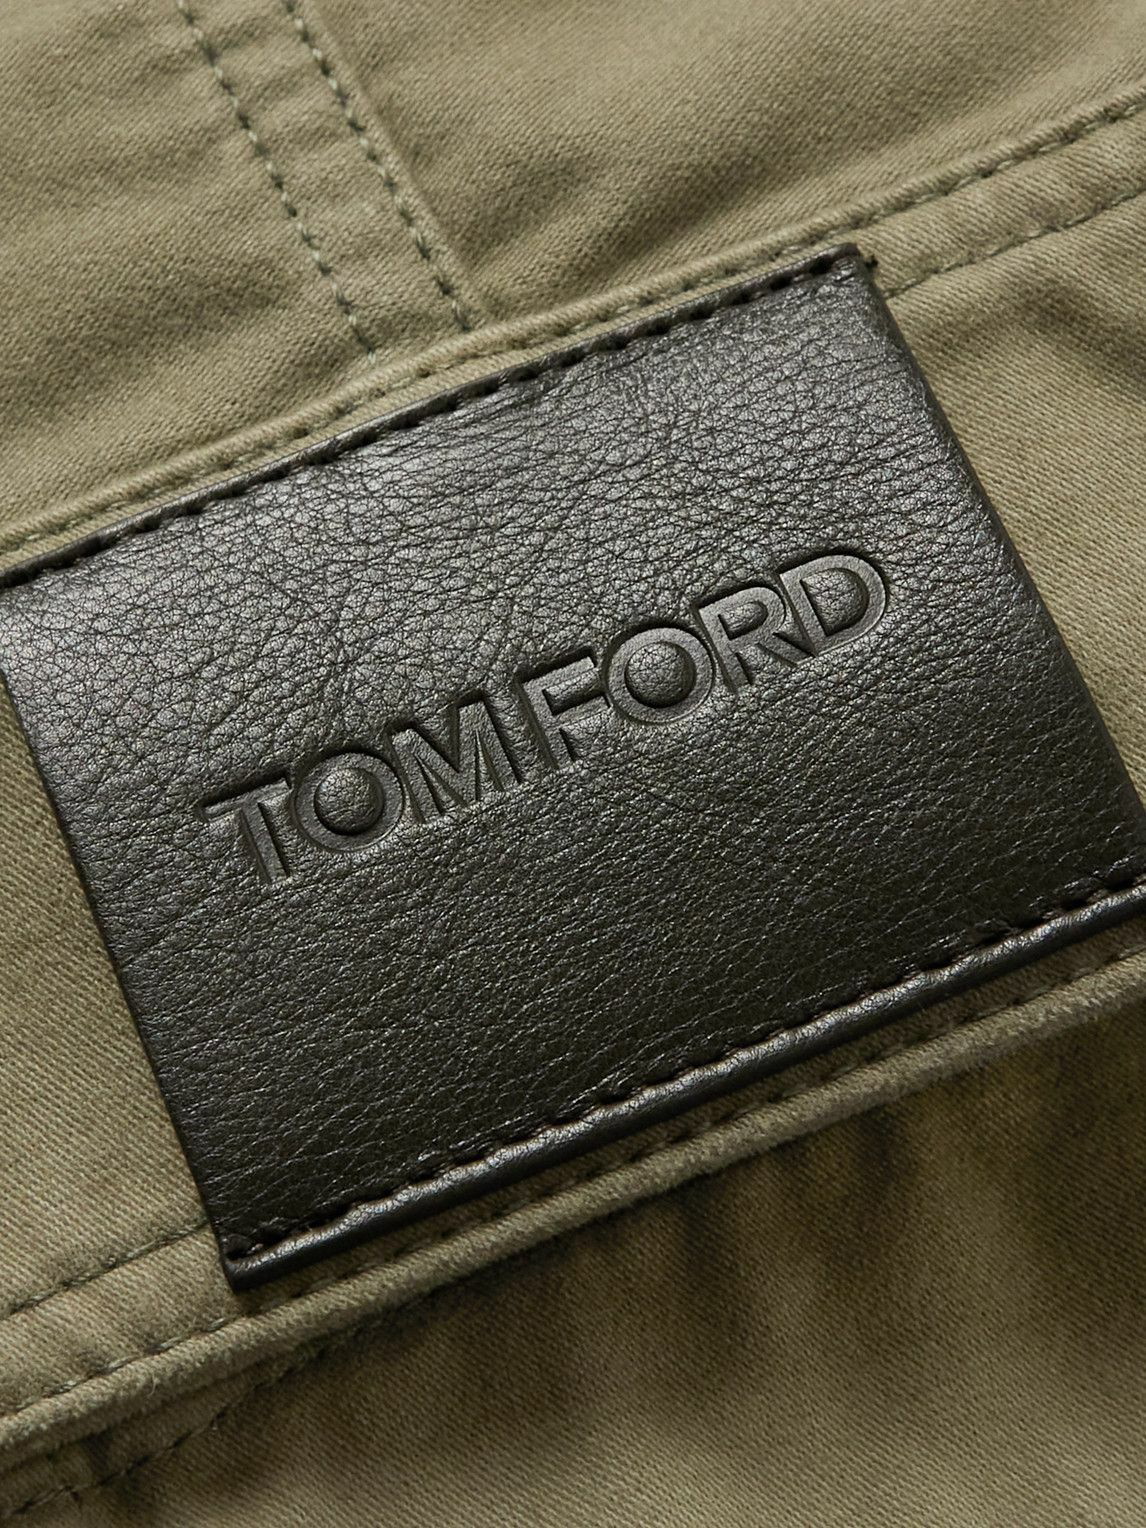 TOM FORD - Slim-Fit Fleece-Trimmed Washed Cotton-Twill Jacket - Green ...